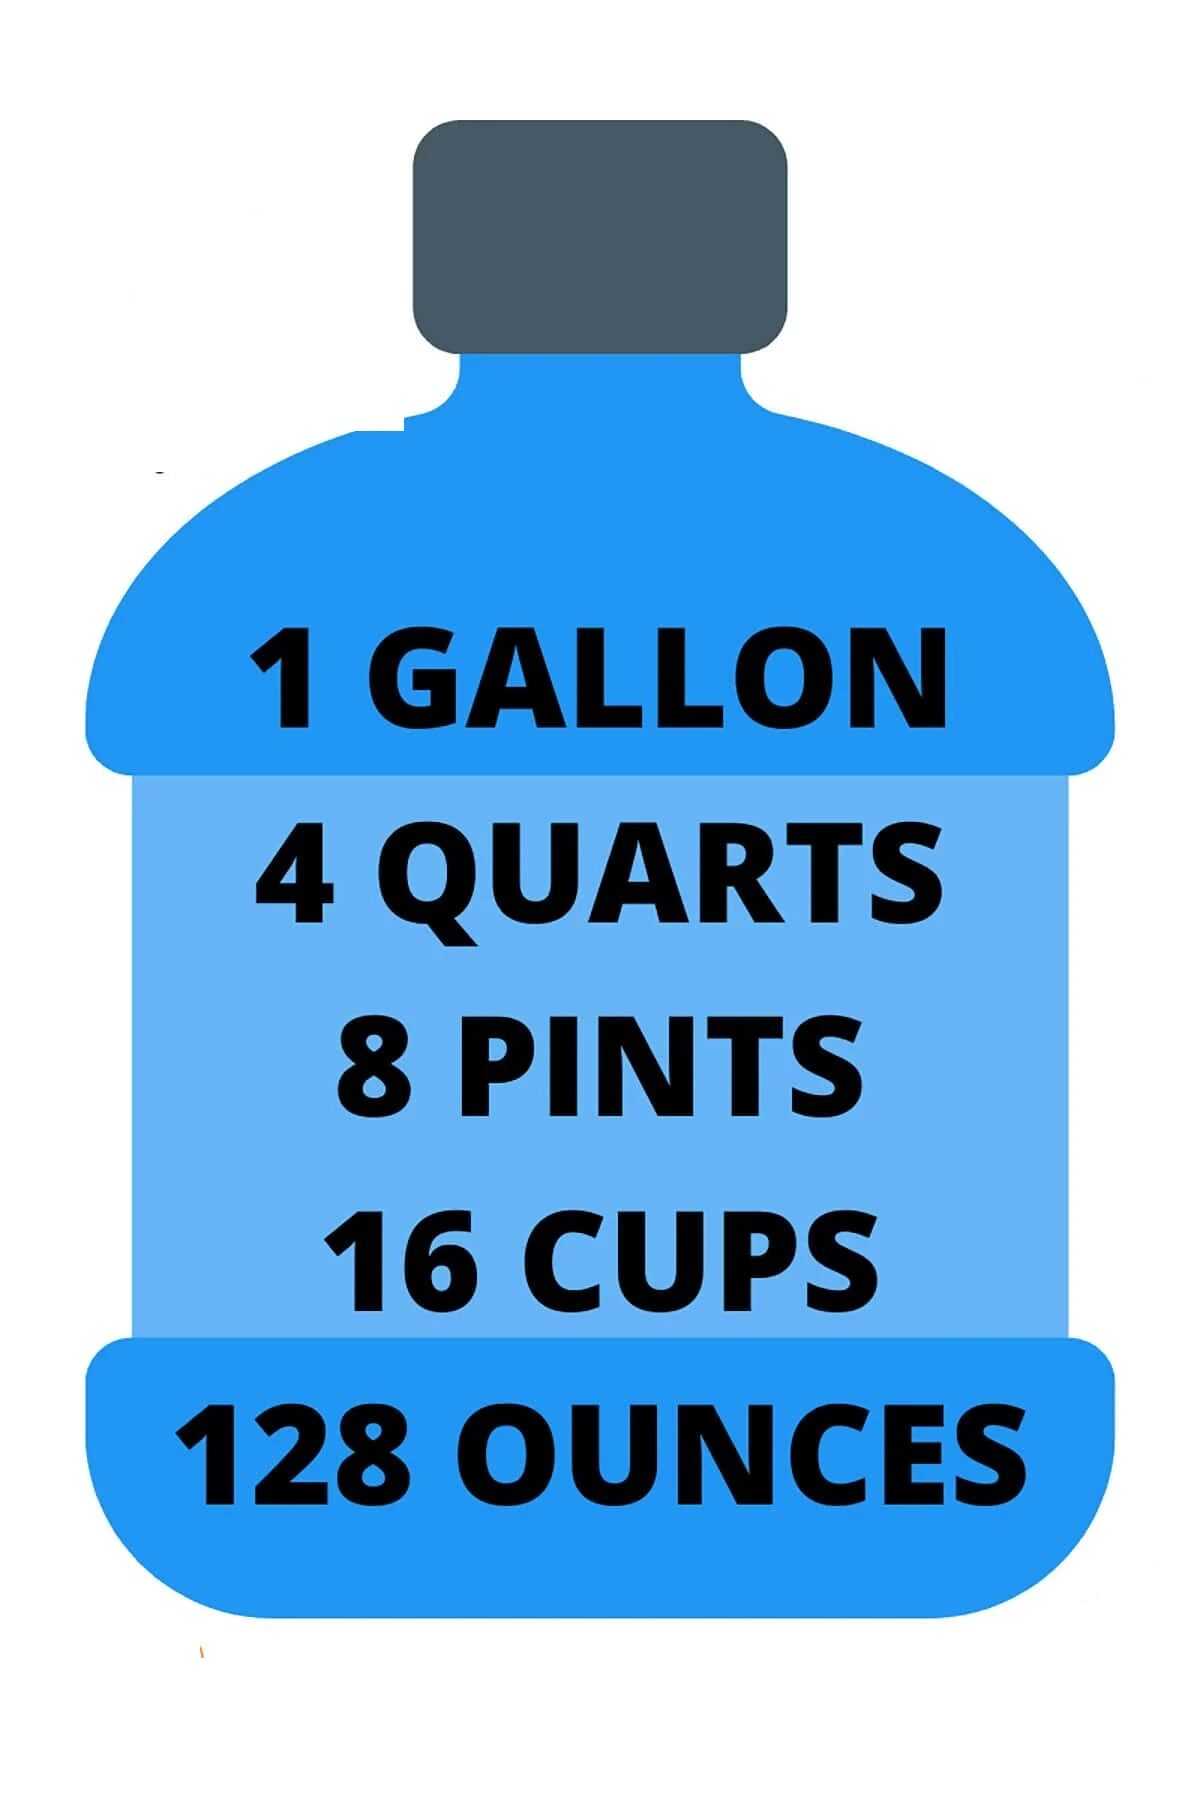 Illustration of gallon and fluid ounce conversion